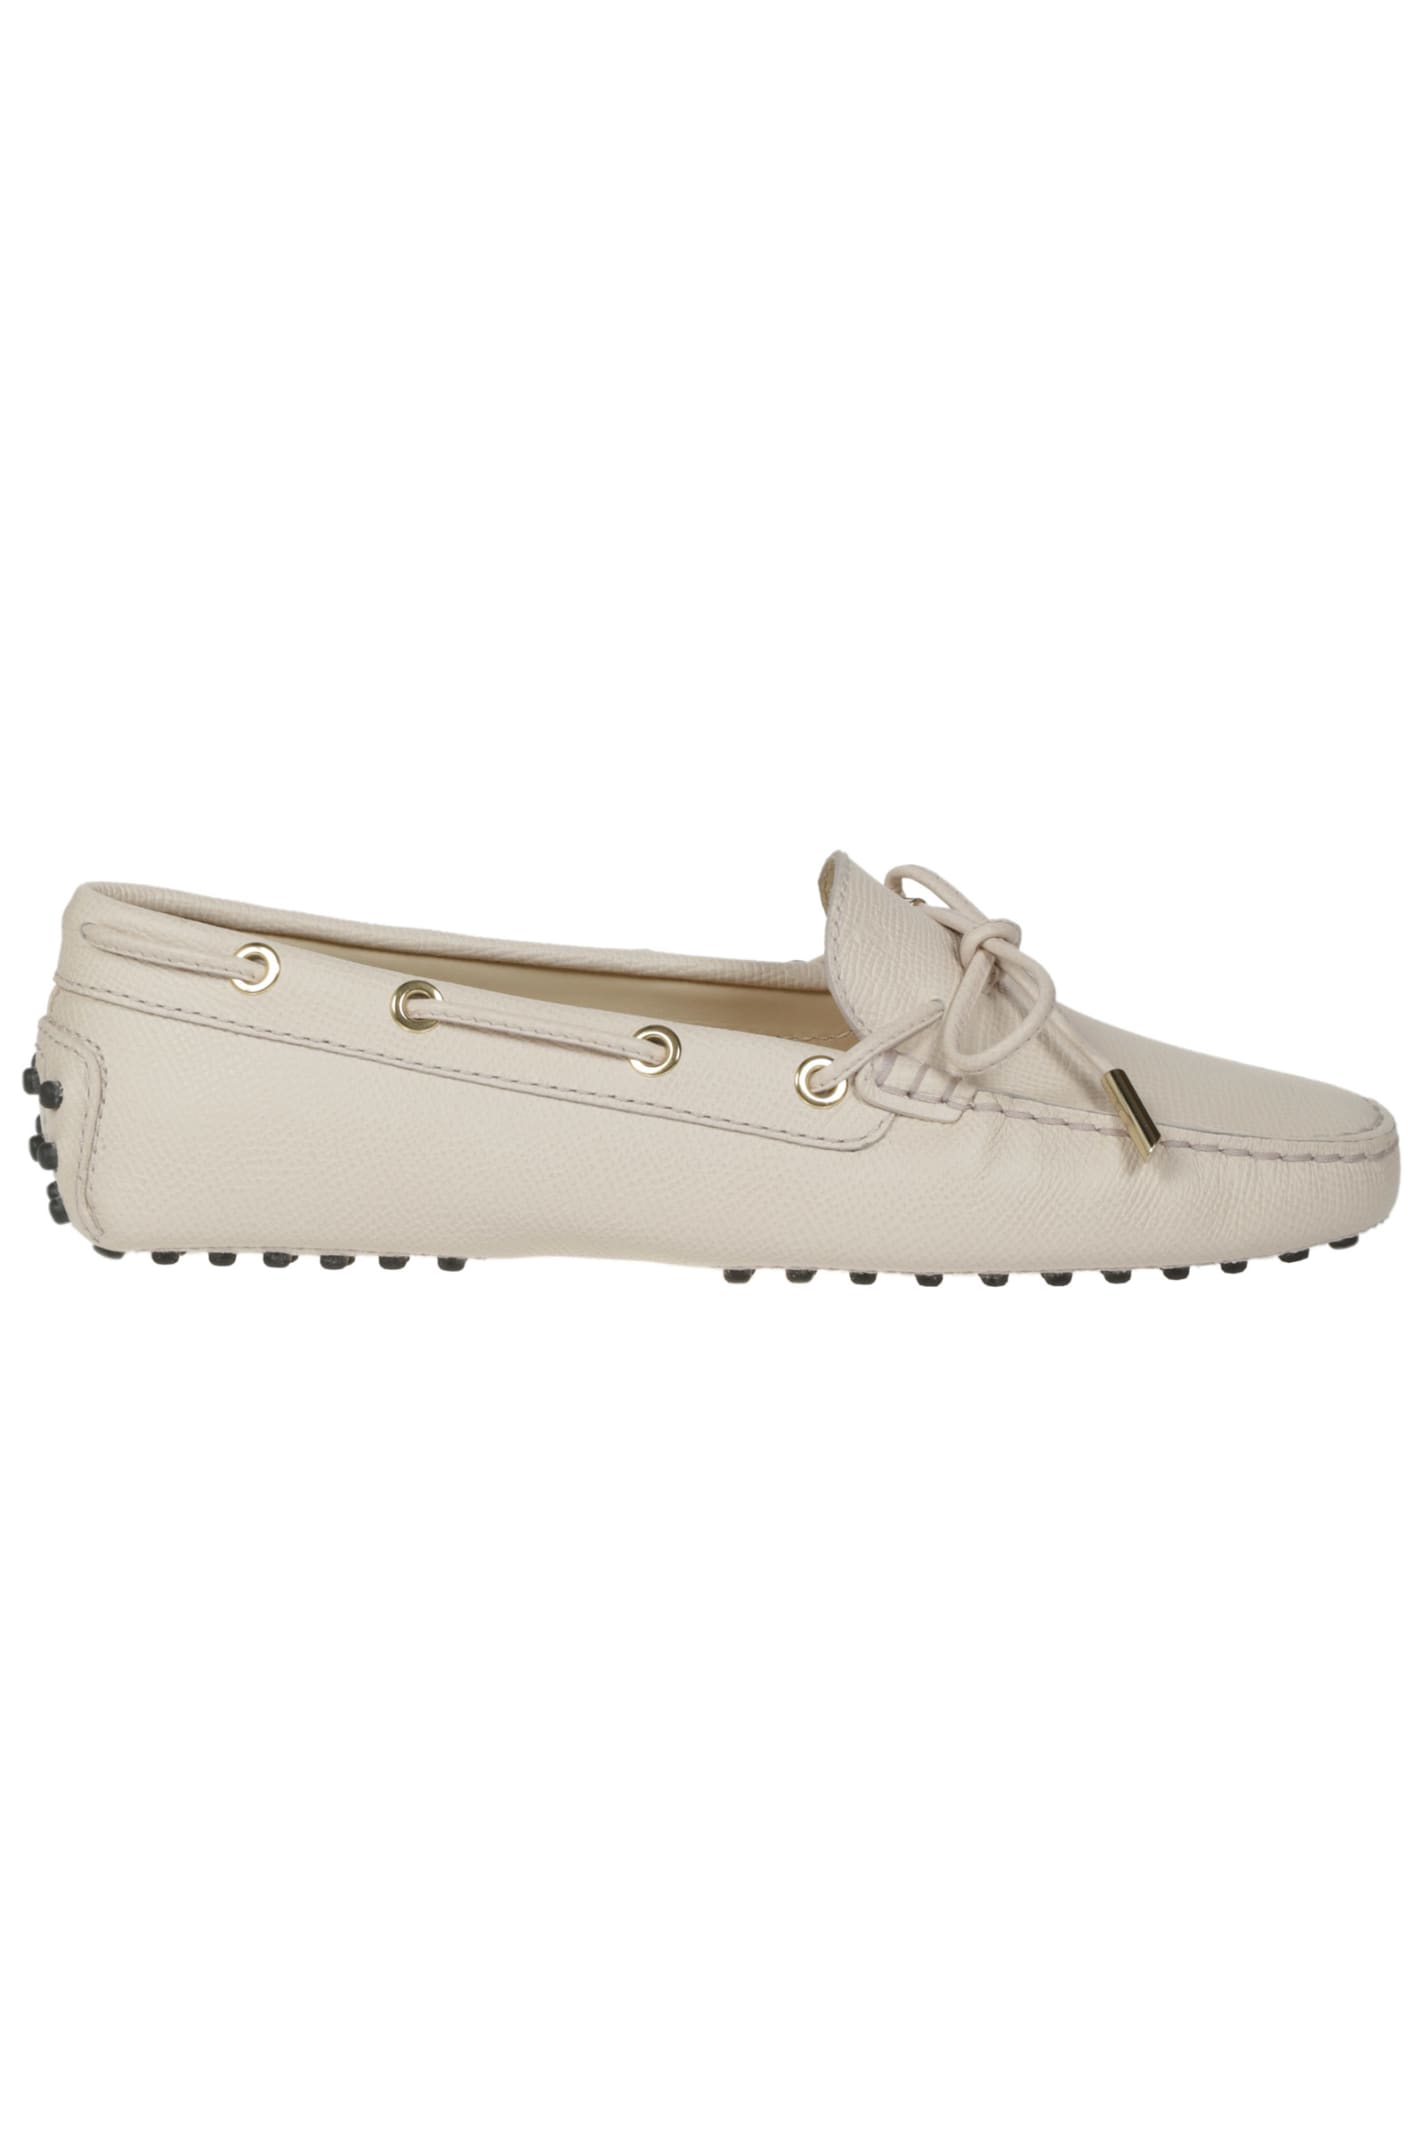 Tods Heaven Lace-up Loafers